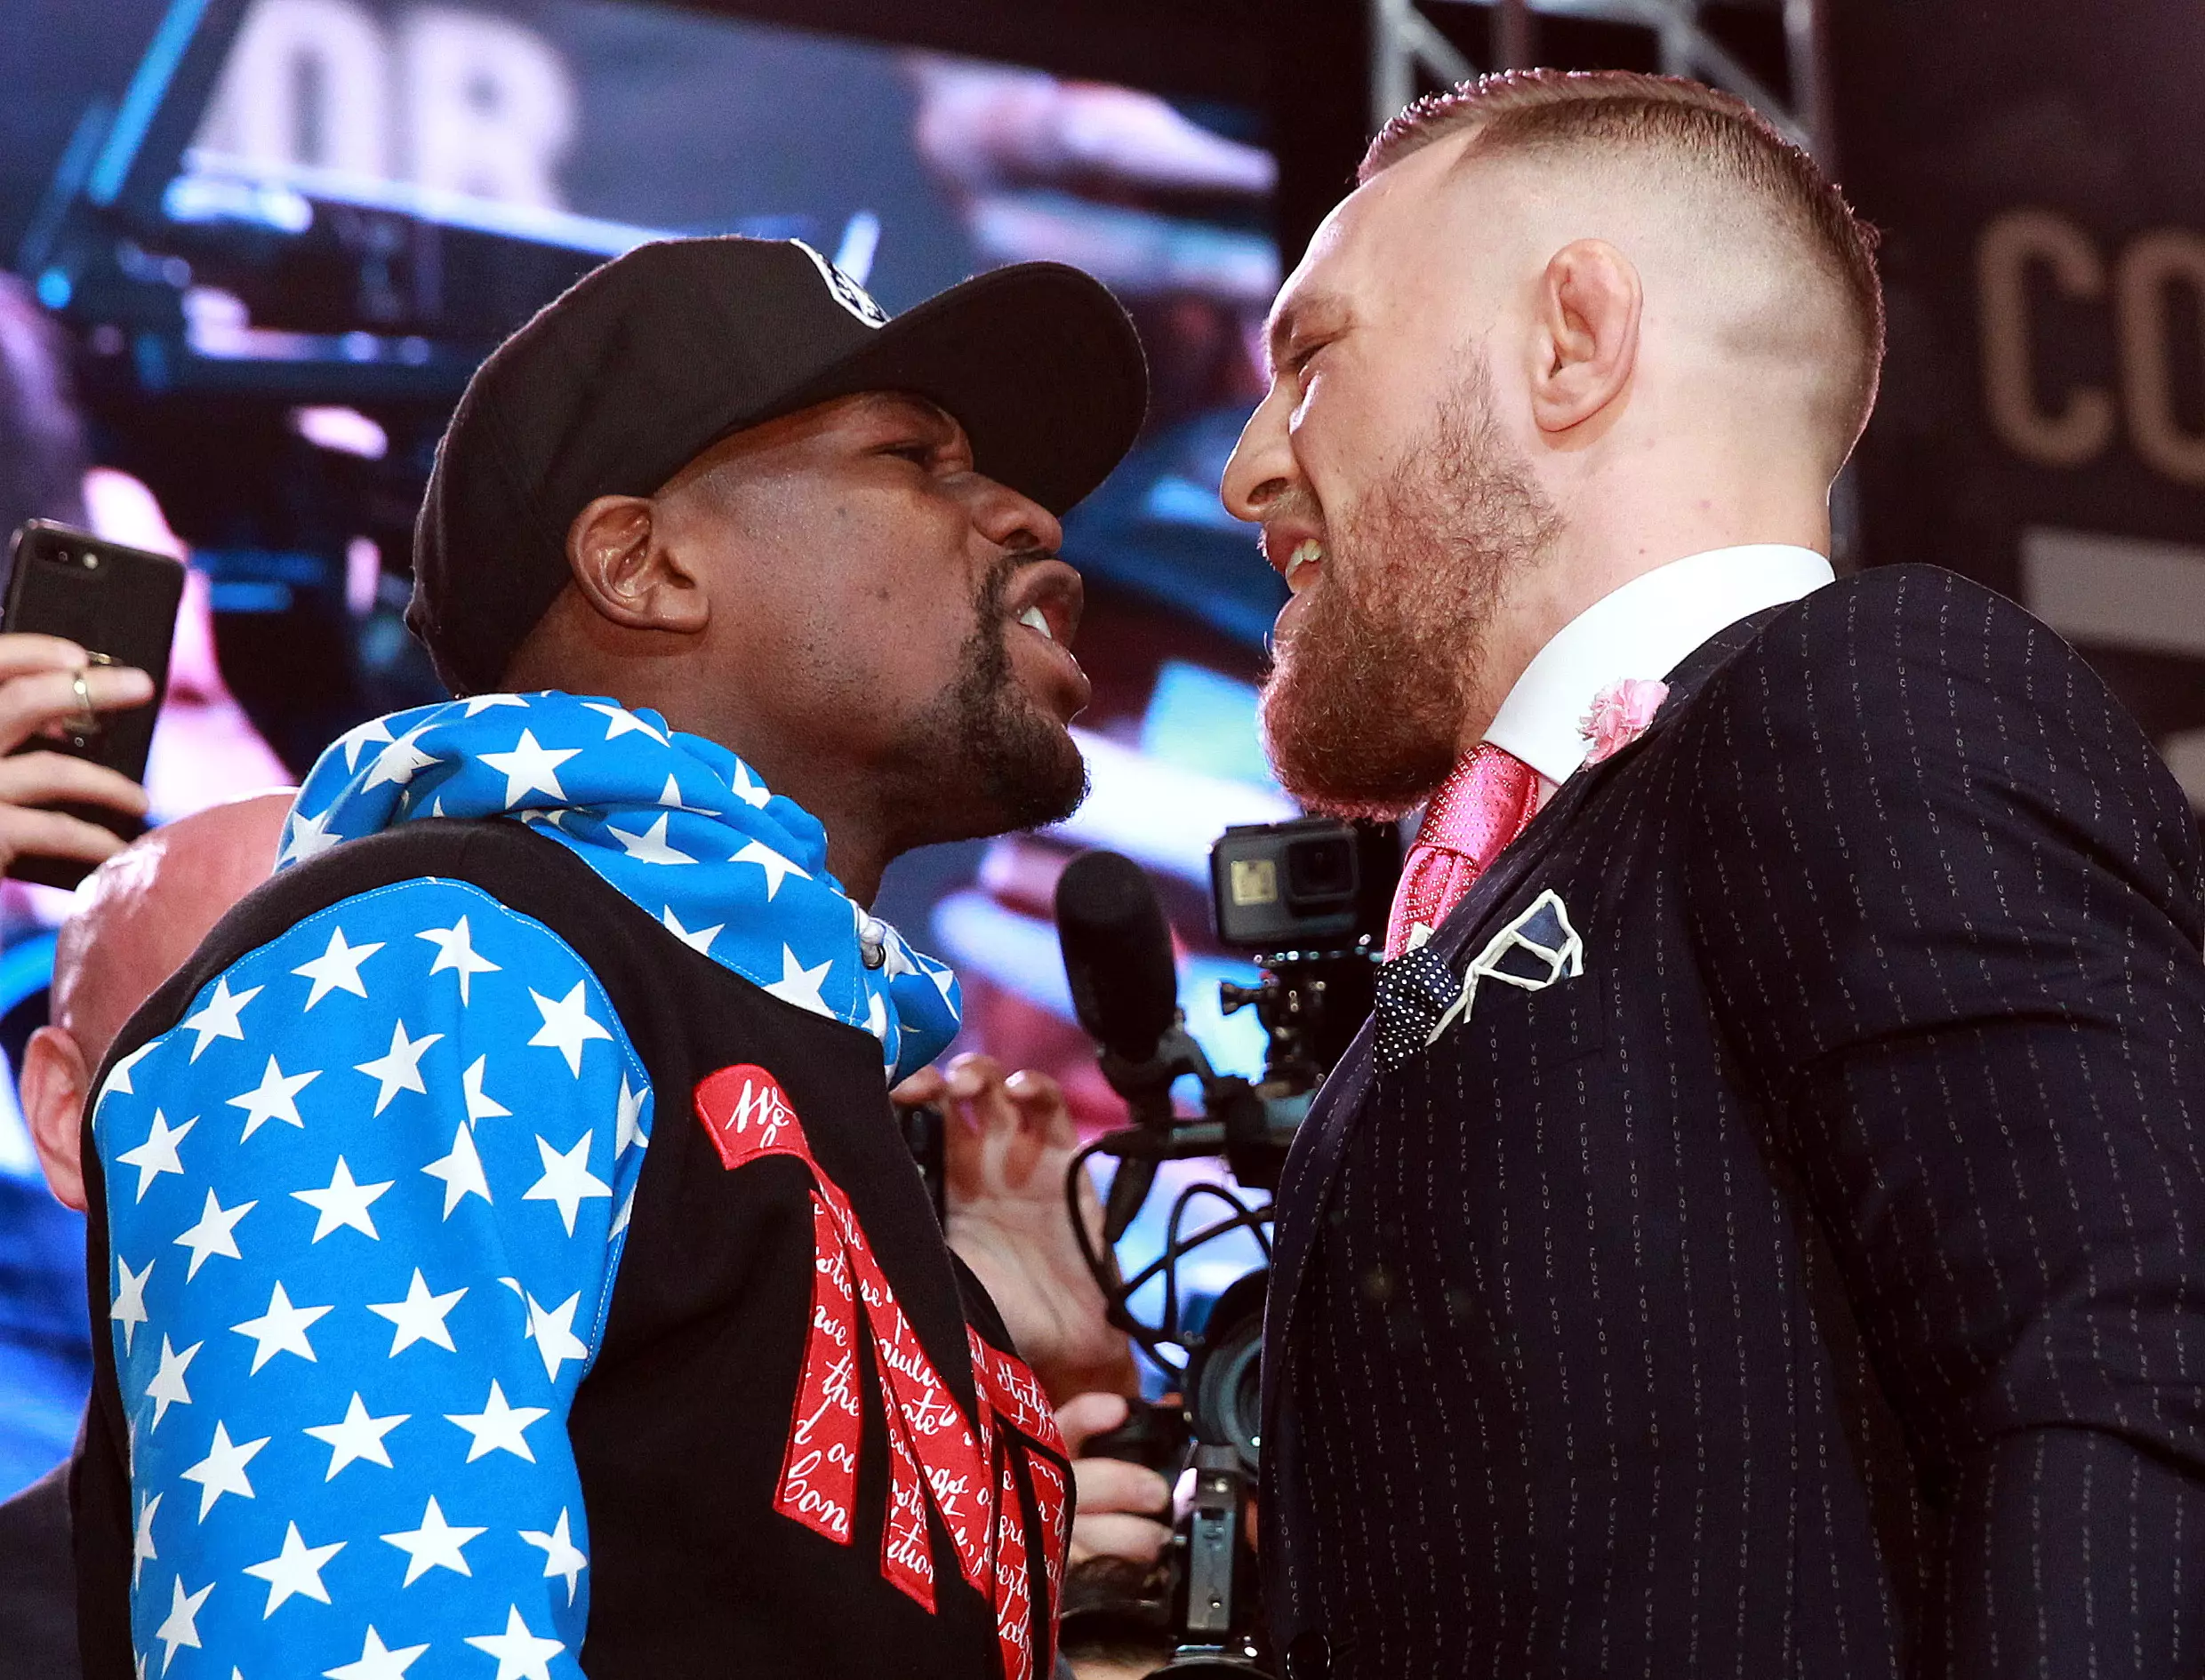 McGregor & Mayweather both made big money from their fight. Image: PA Images